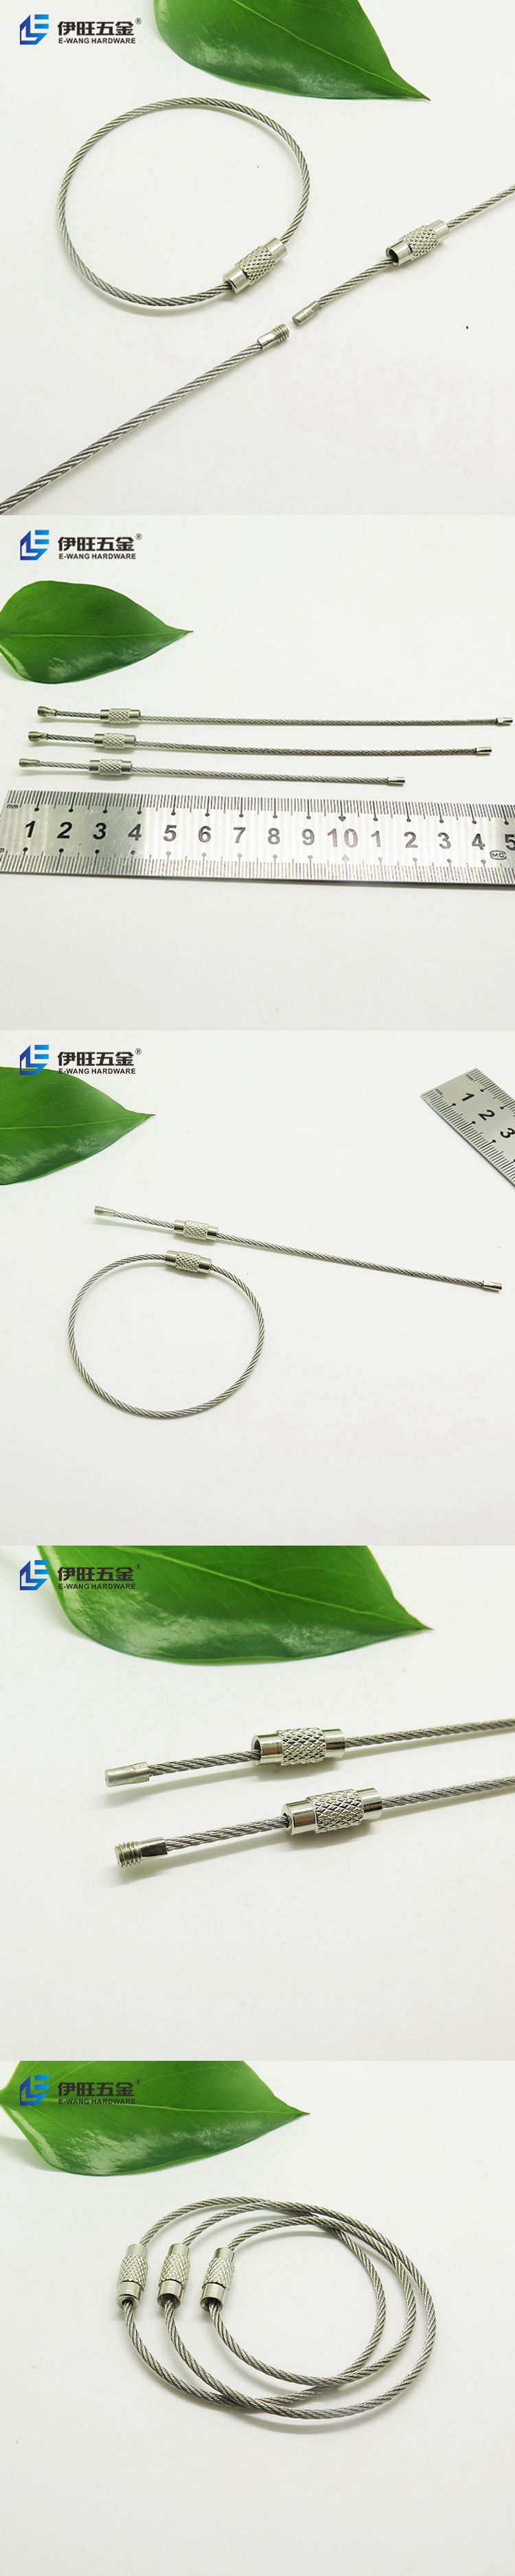 stainless steel cable loop key ring